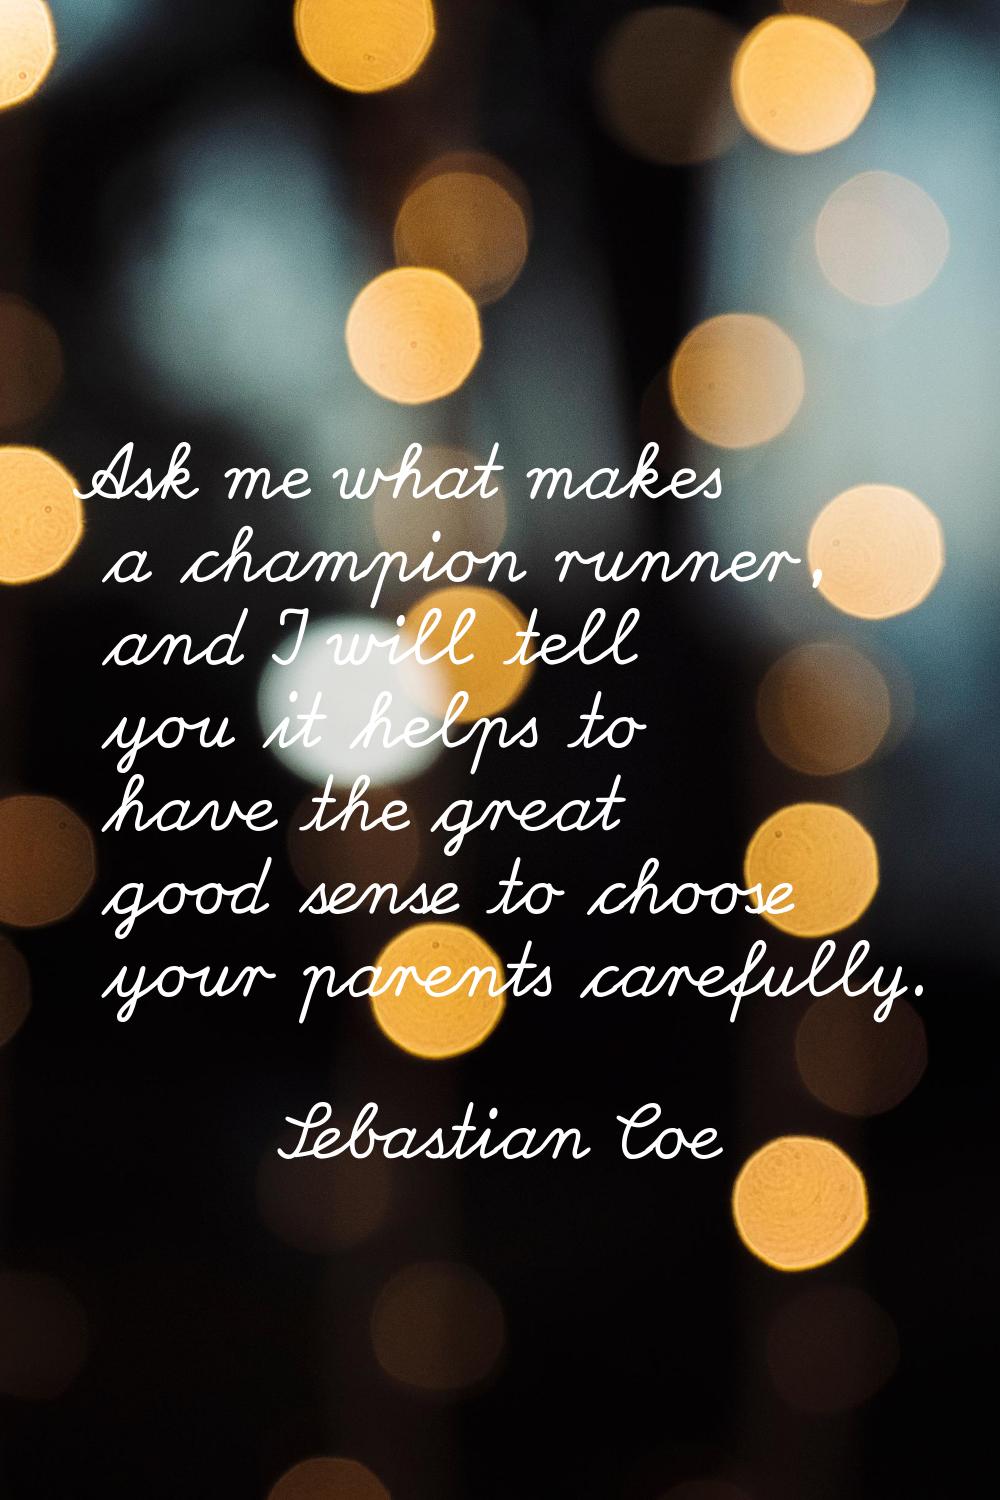 Ask me what makes a champion runner, and I will tell you it helps to have the great good sense to c